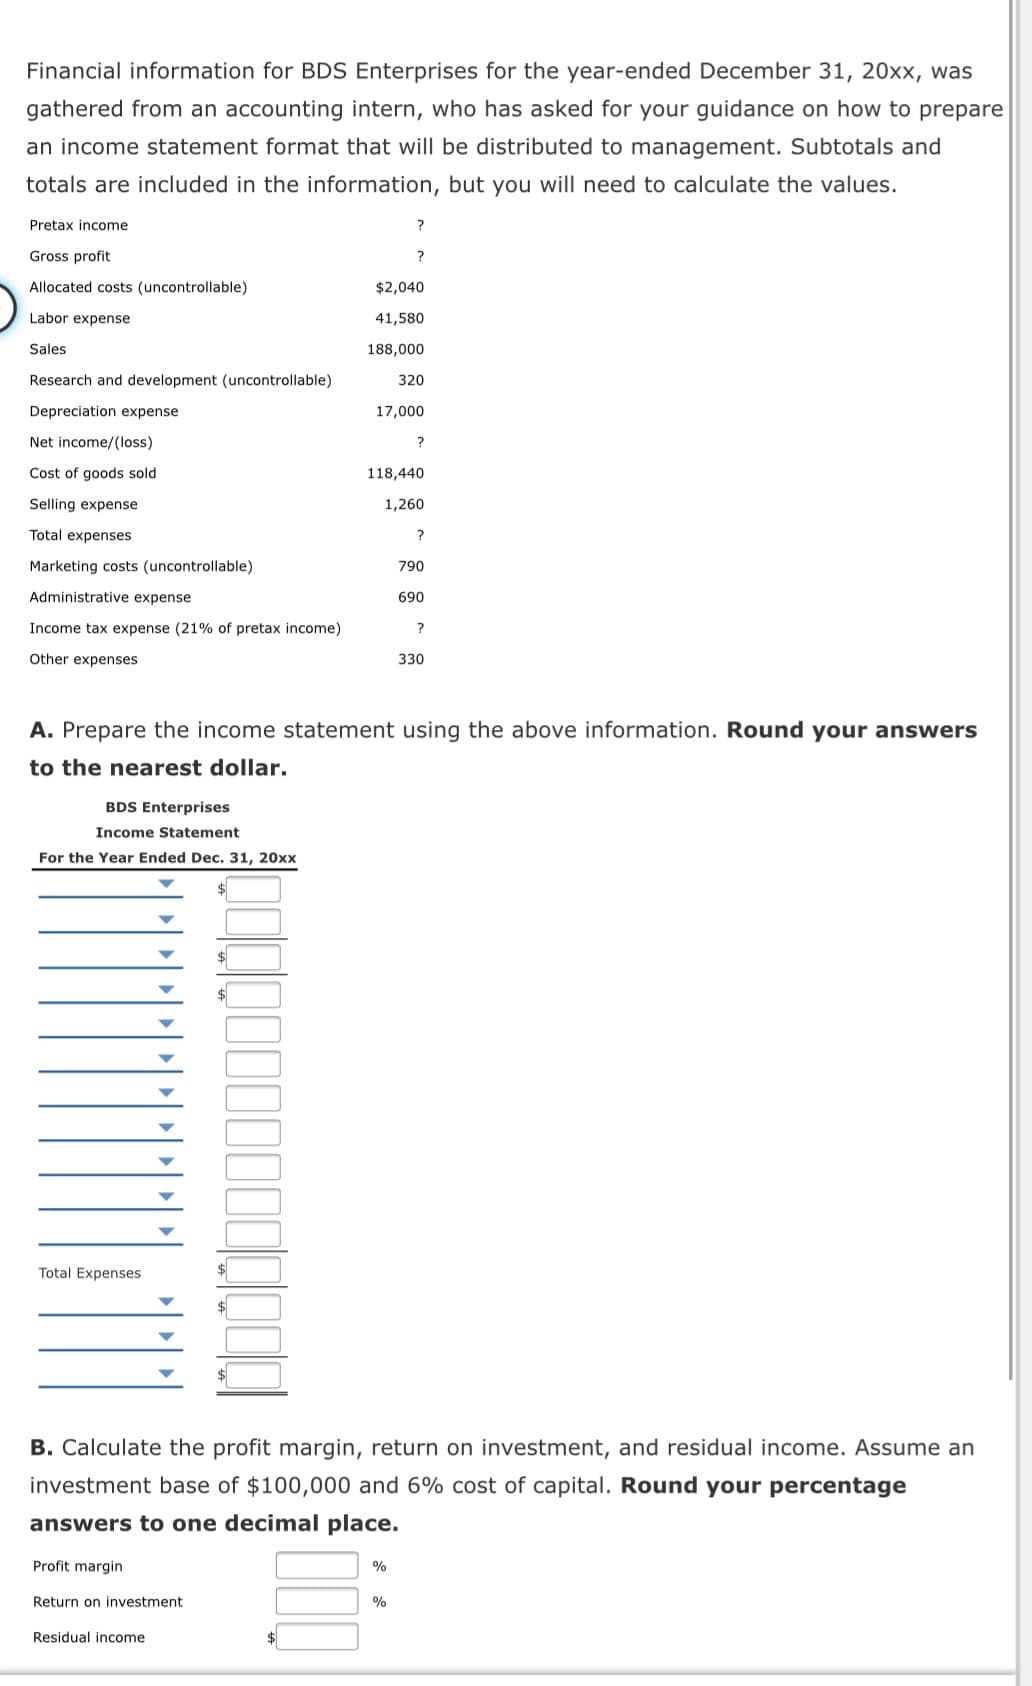 Financial information for BDS Enterprises for the year-ended December 31, 20xx, was
gathered from an accounting intern, who has asked for your guidance on how to prepare
an income statement format that will be distributed to management. Subtotals and
totals are included in the information, but you will need to calculate the values.
Pretax income
?
Gross profit
?
Allocated costs (uncontrollable)
$2,040
Labor expense
41,580
Sales
188,000
Research and development (uncontrollable)
320
Depreciation expense
17,000
Net income/(loss)
?
Cost of goods sold
118,440
Selling expense
1,260
Total expenses
Marketing costs (uncontrollable)
790
Administrative expense
690
Income tax expense (21% of pretax income)
?
Other expenses
330
A. Prepare the income statement using the above information. Round your answers
to the nearest dollar.
BDS Enterprises
Income Statement
For the Year Ended Dec. 31, 20xx
Total Expenses
B. Calculate the profit margin, return on investment, and residual income. Assume an
investment base of $100,000 and 6% cost of capital. Round your percentage
answers to one decimal place.
Profit margin
%
Return on investment
Residual income
